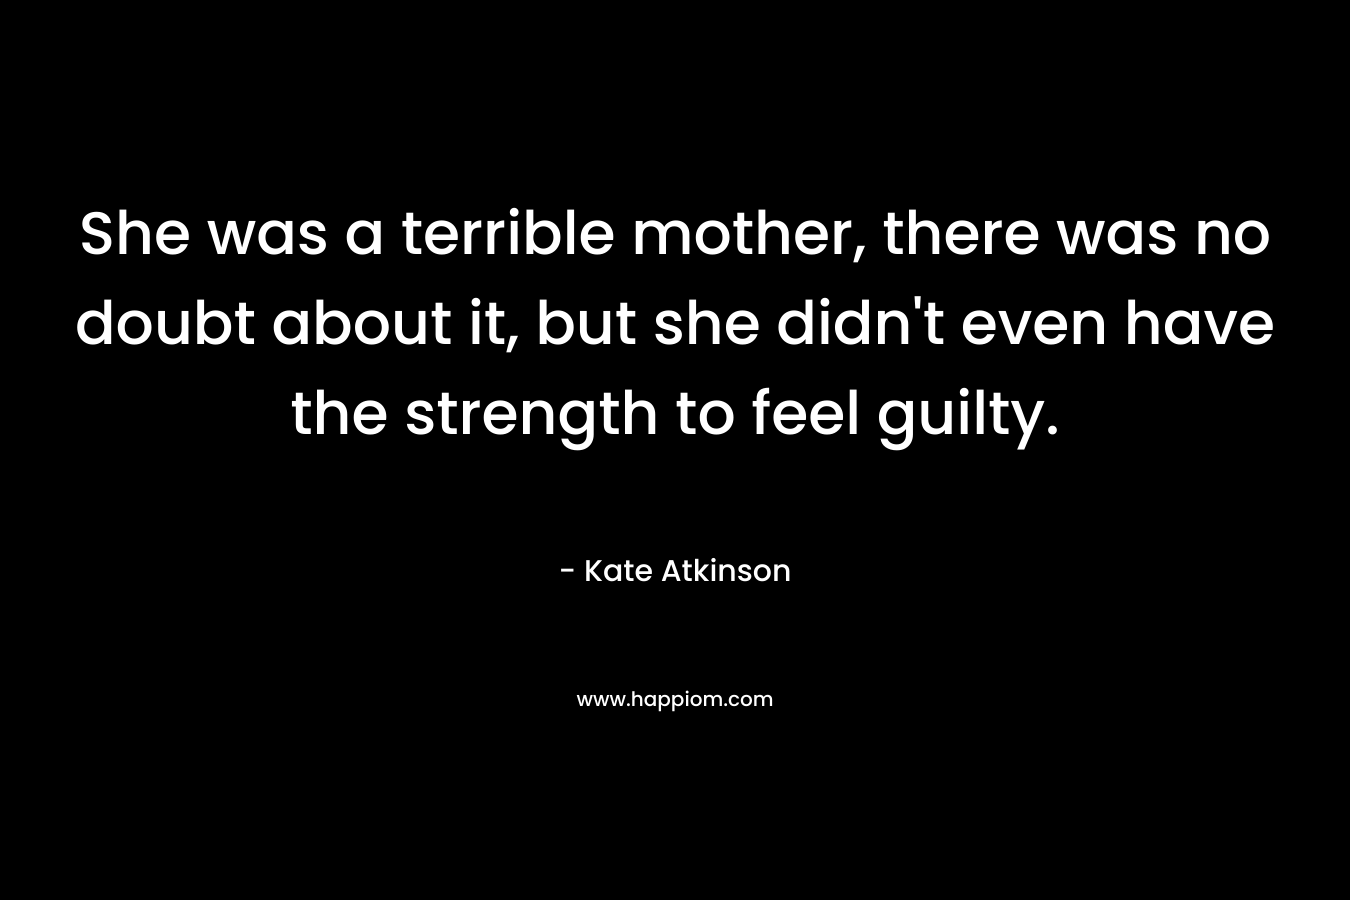 She was a terrible mother, there was no doubt about it, but she didn’t even have the strength to feel guilty. – Kate Atkinson